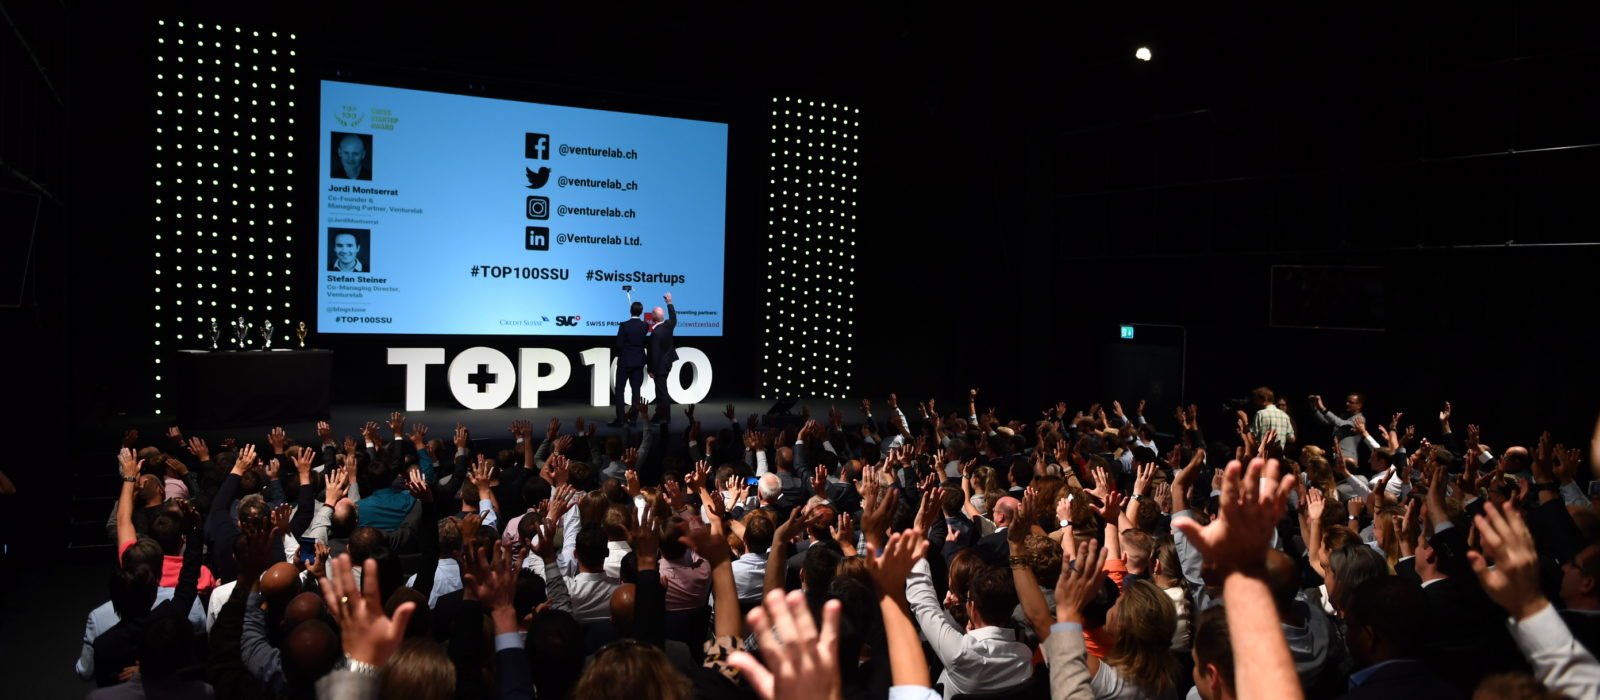 Discover the most promising Swiss deeptech startups at the TOP 100 Swiss Startup Award